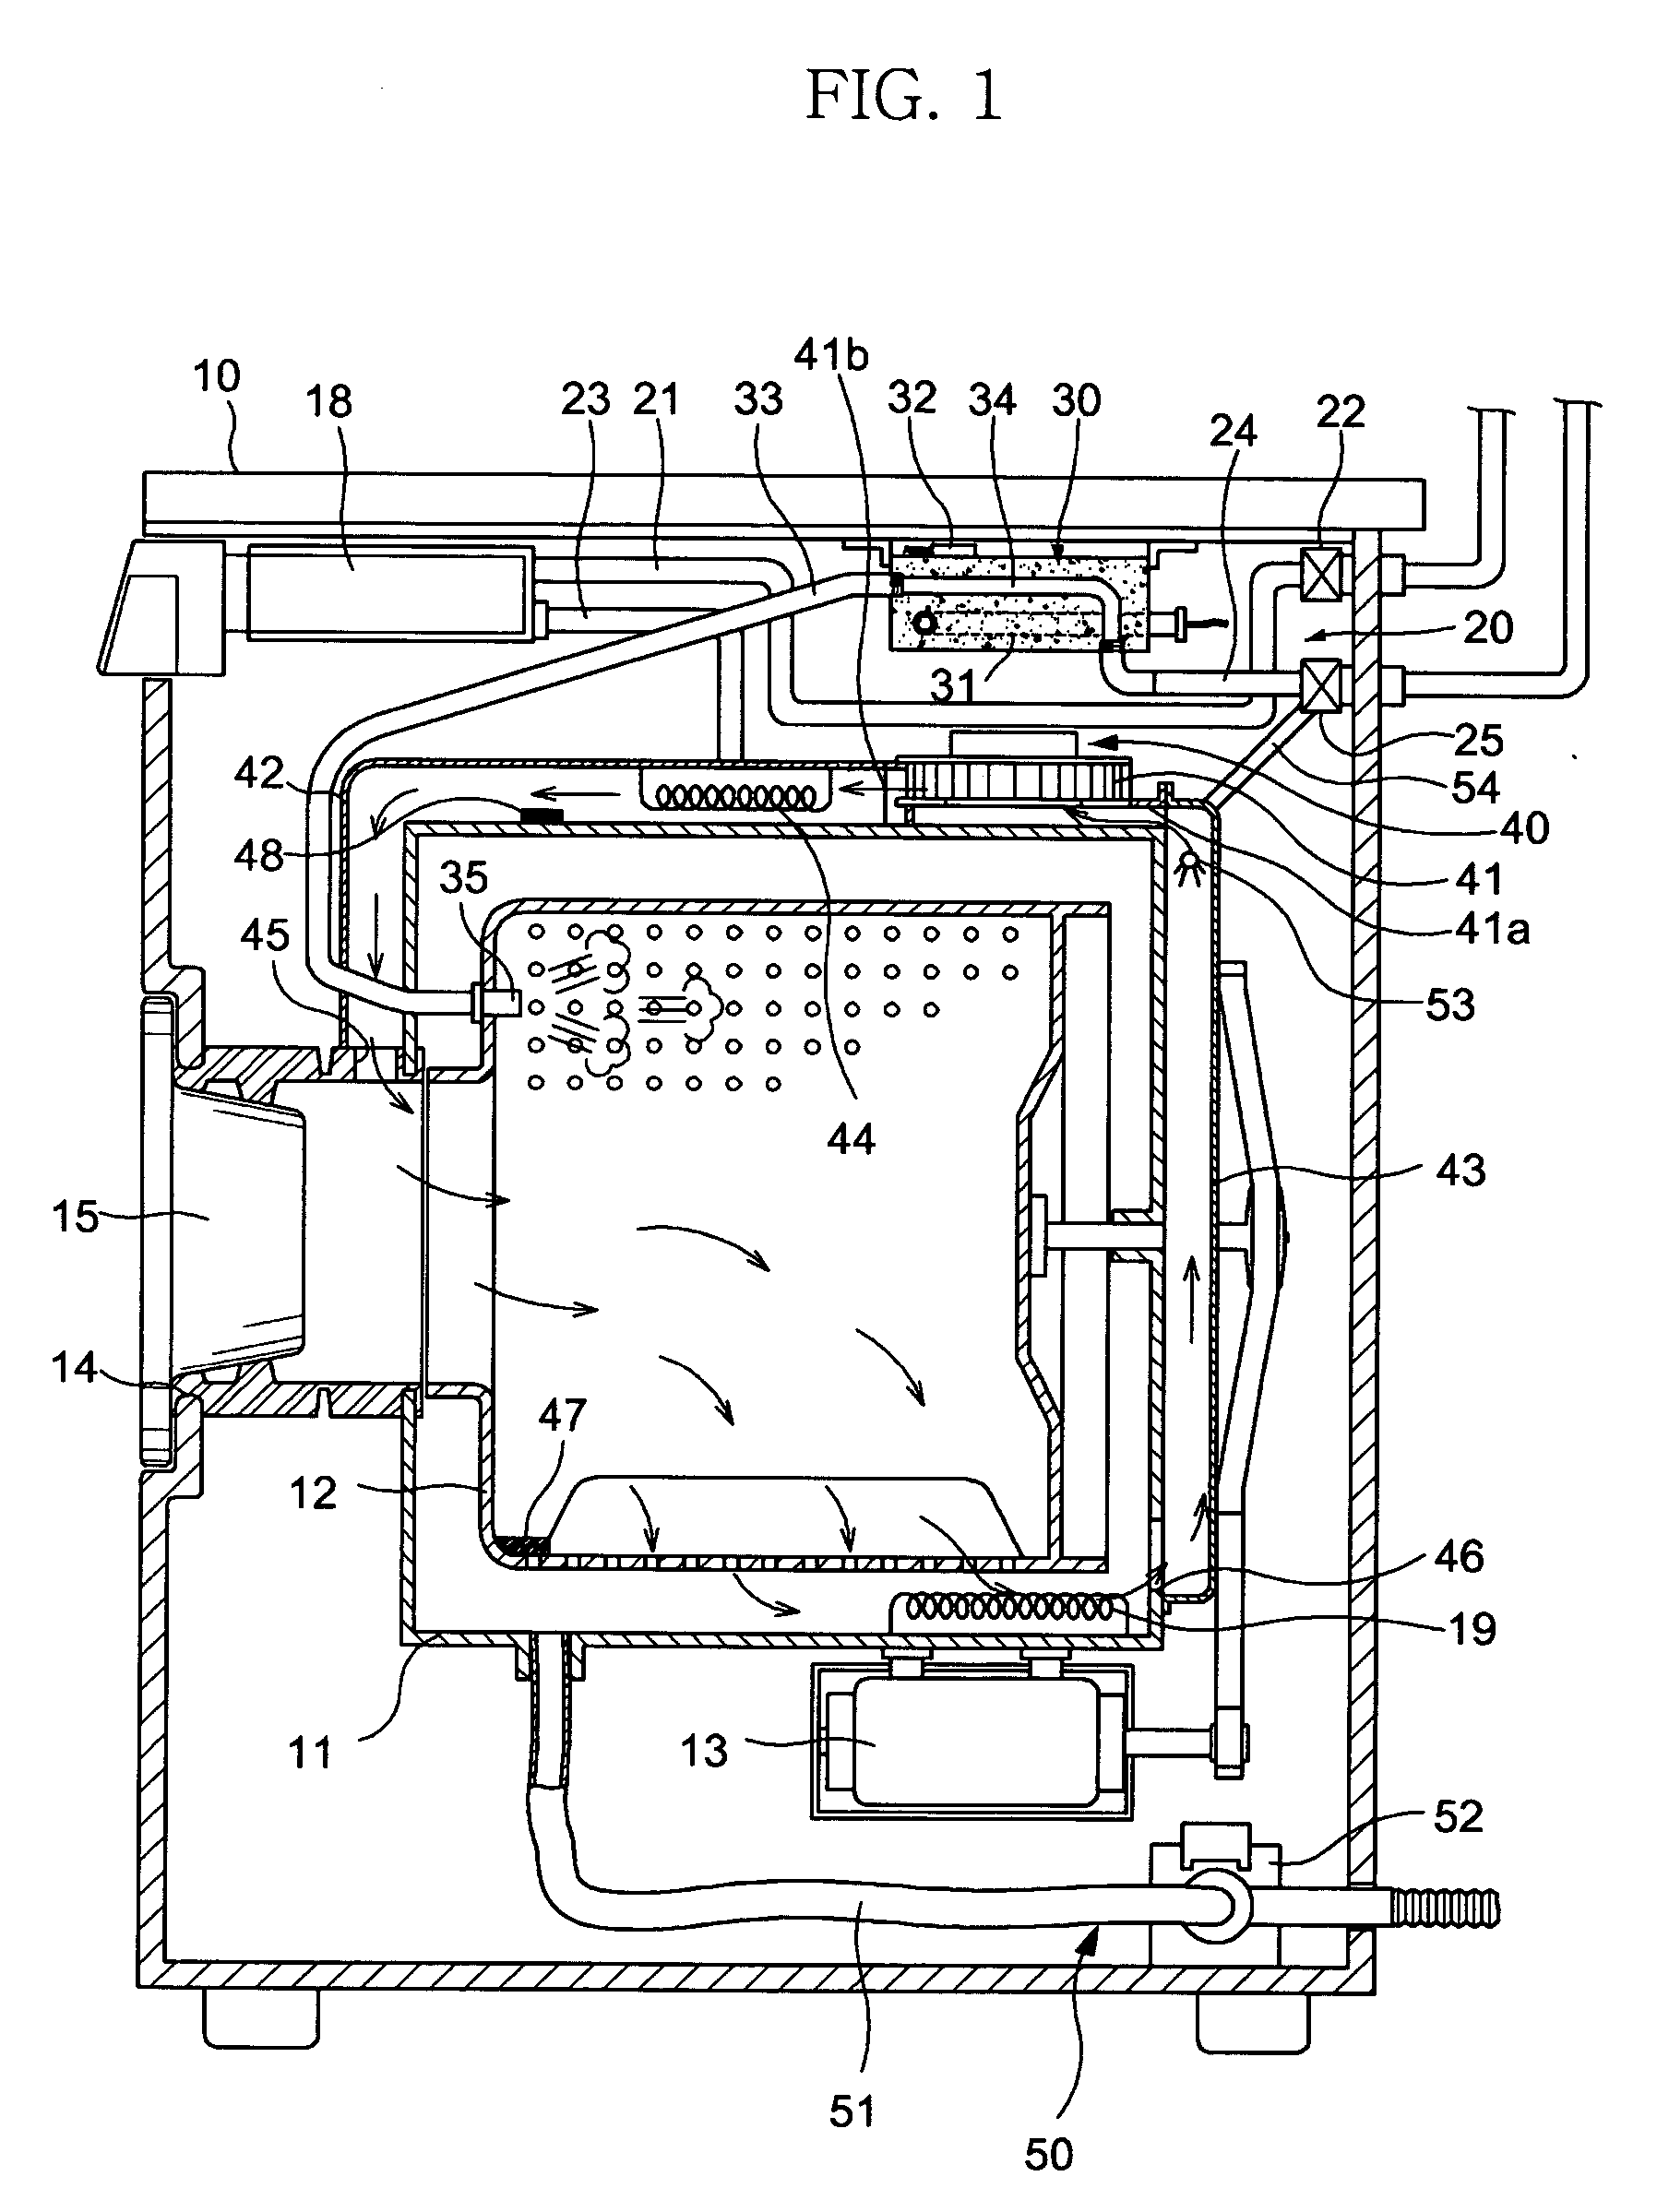 Apparatus and method for eliminating wrinkles in clothes